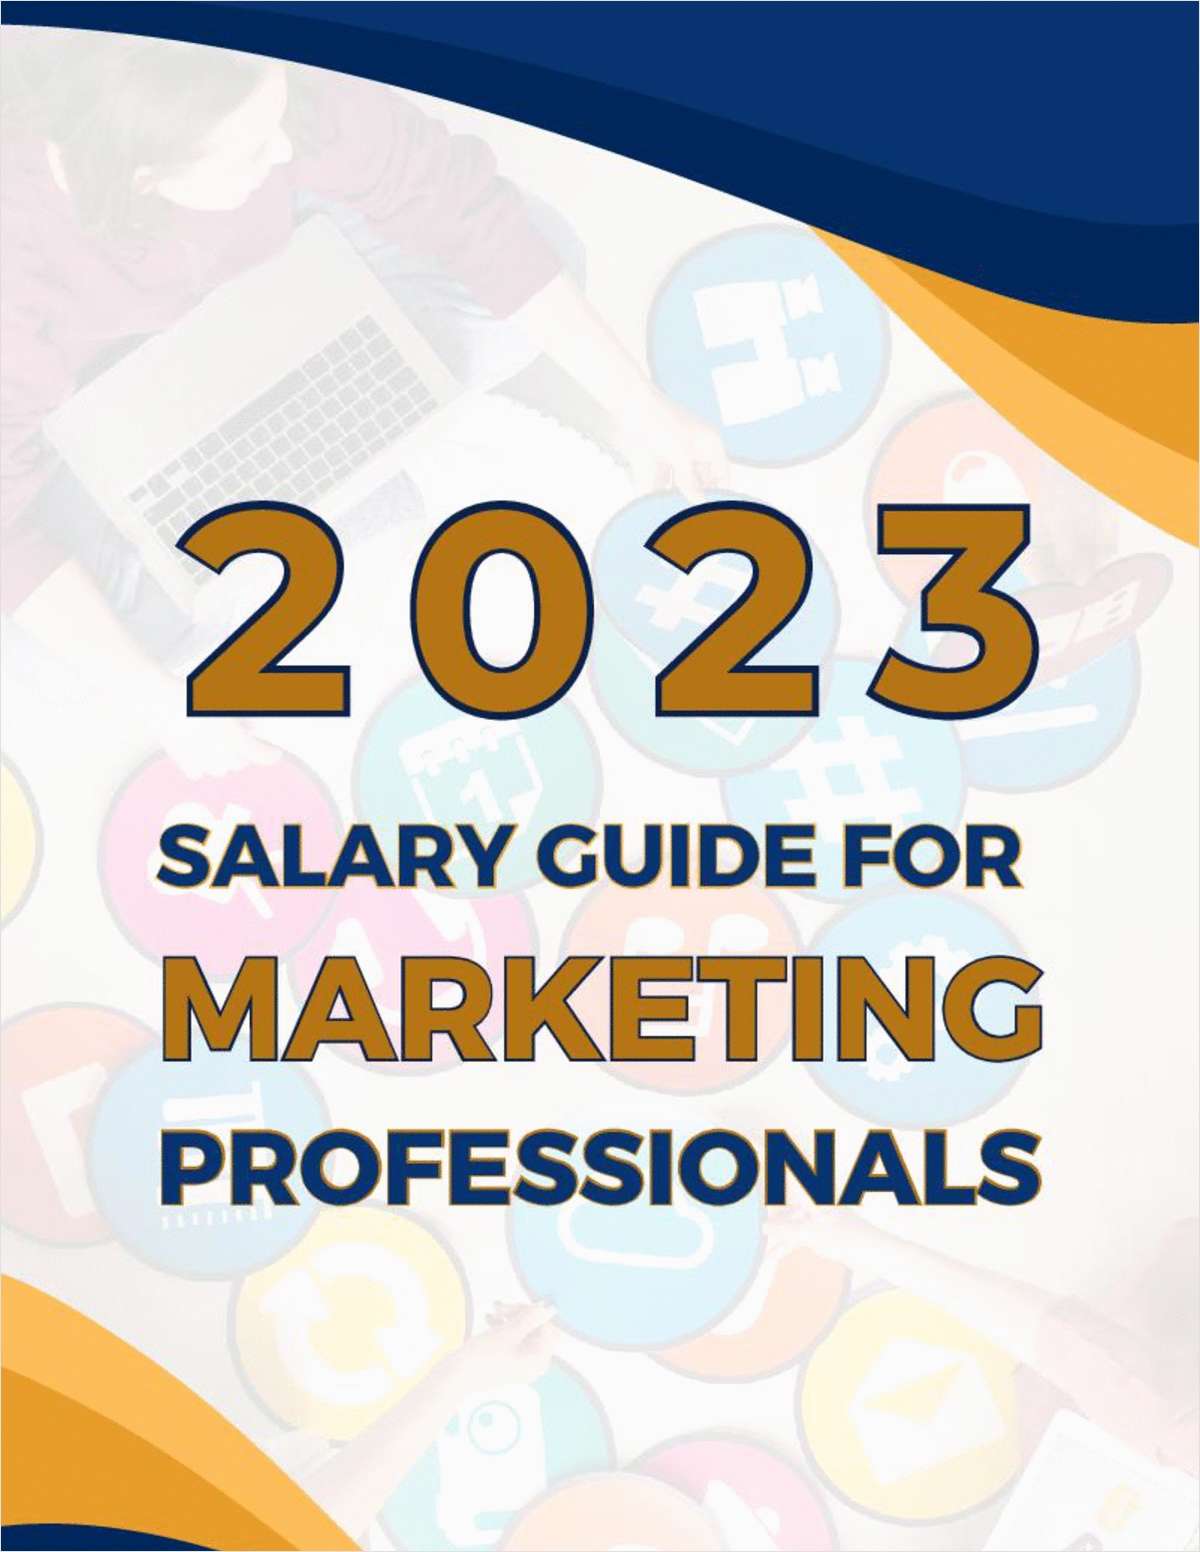 2023 Salary Guide for Marketing Professionals